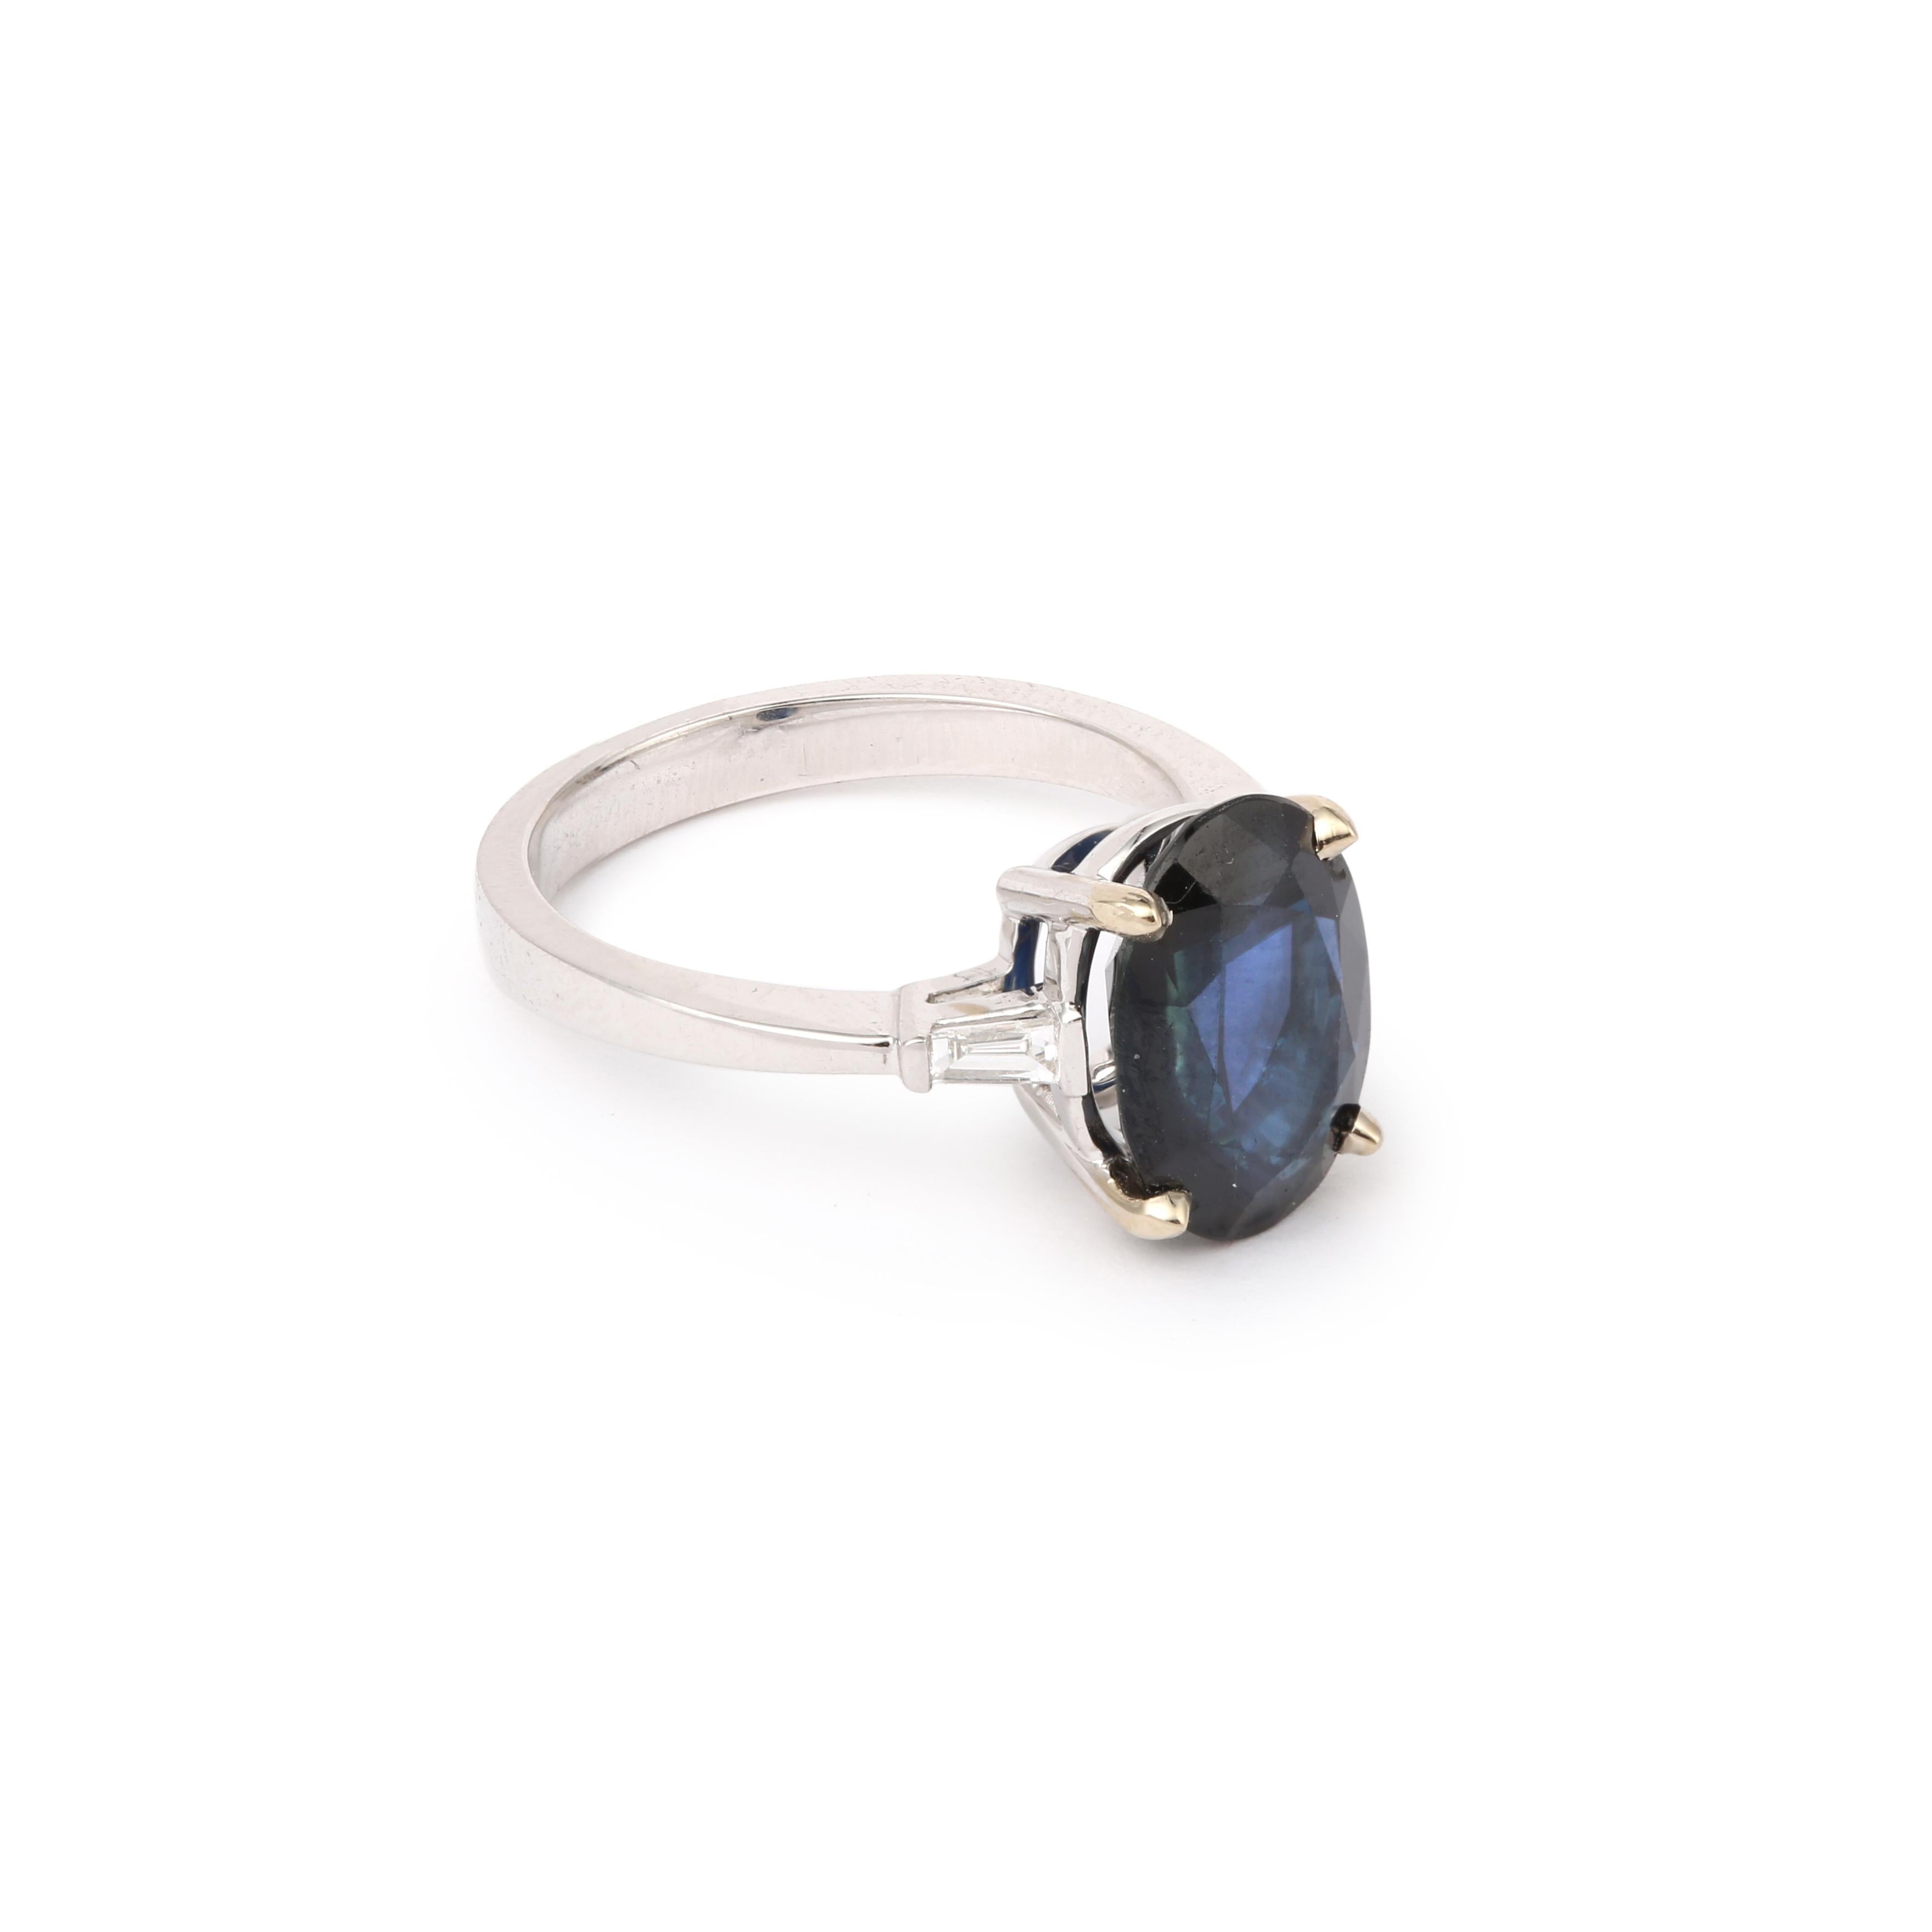 White gold ring set with a large sapphire surrounded by baguette-cut diamonds.

Weight of the sapphire : 4.47 carats

Total weight of diamonds: 0.15 carats

Dimensions: 11.96 x 14.33 x 7.38 mm (0.471 x 0.564 x 0.290 inch)

Finger size : 53 (US : 6